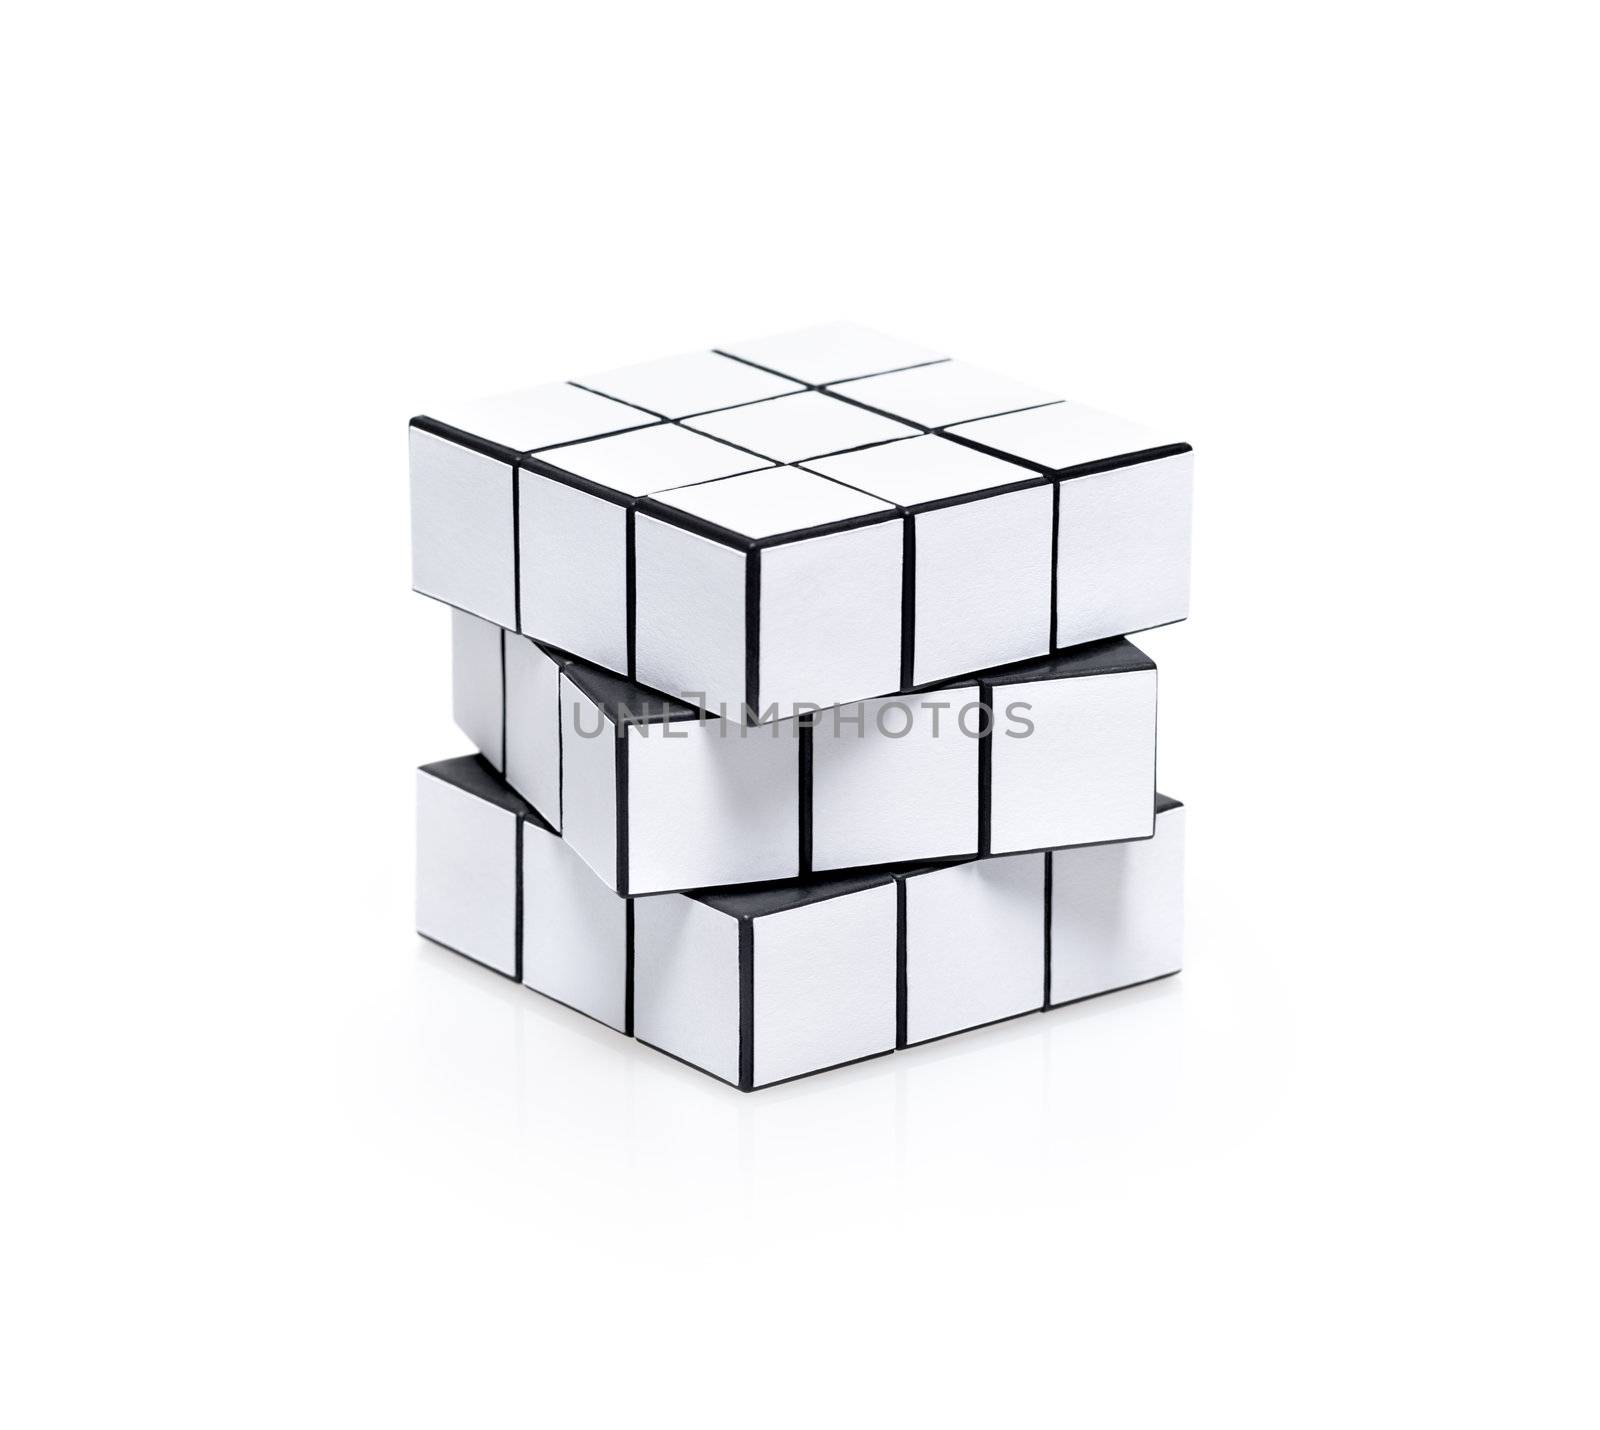 Blank white cubic twist puzzle by bloomua